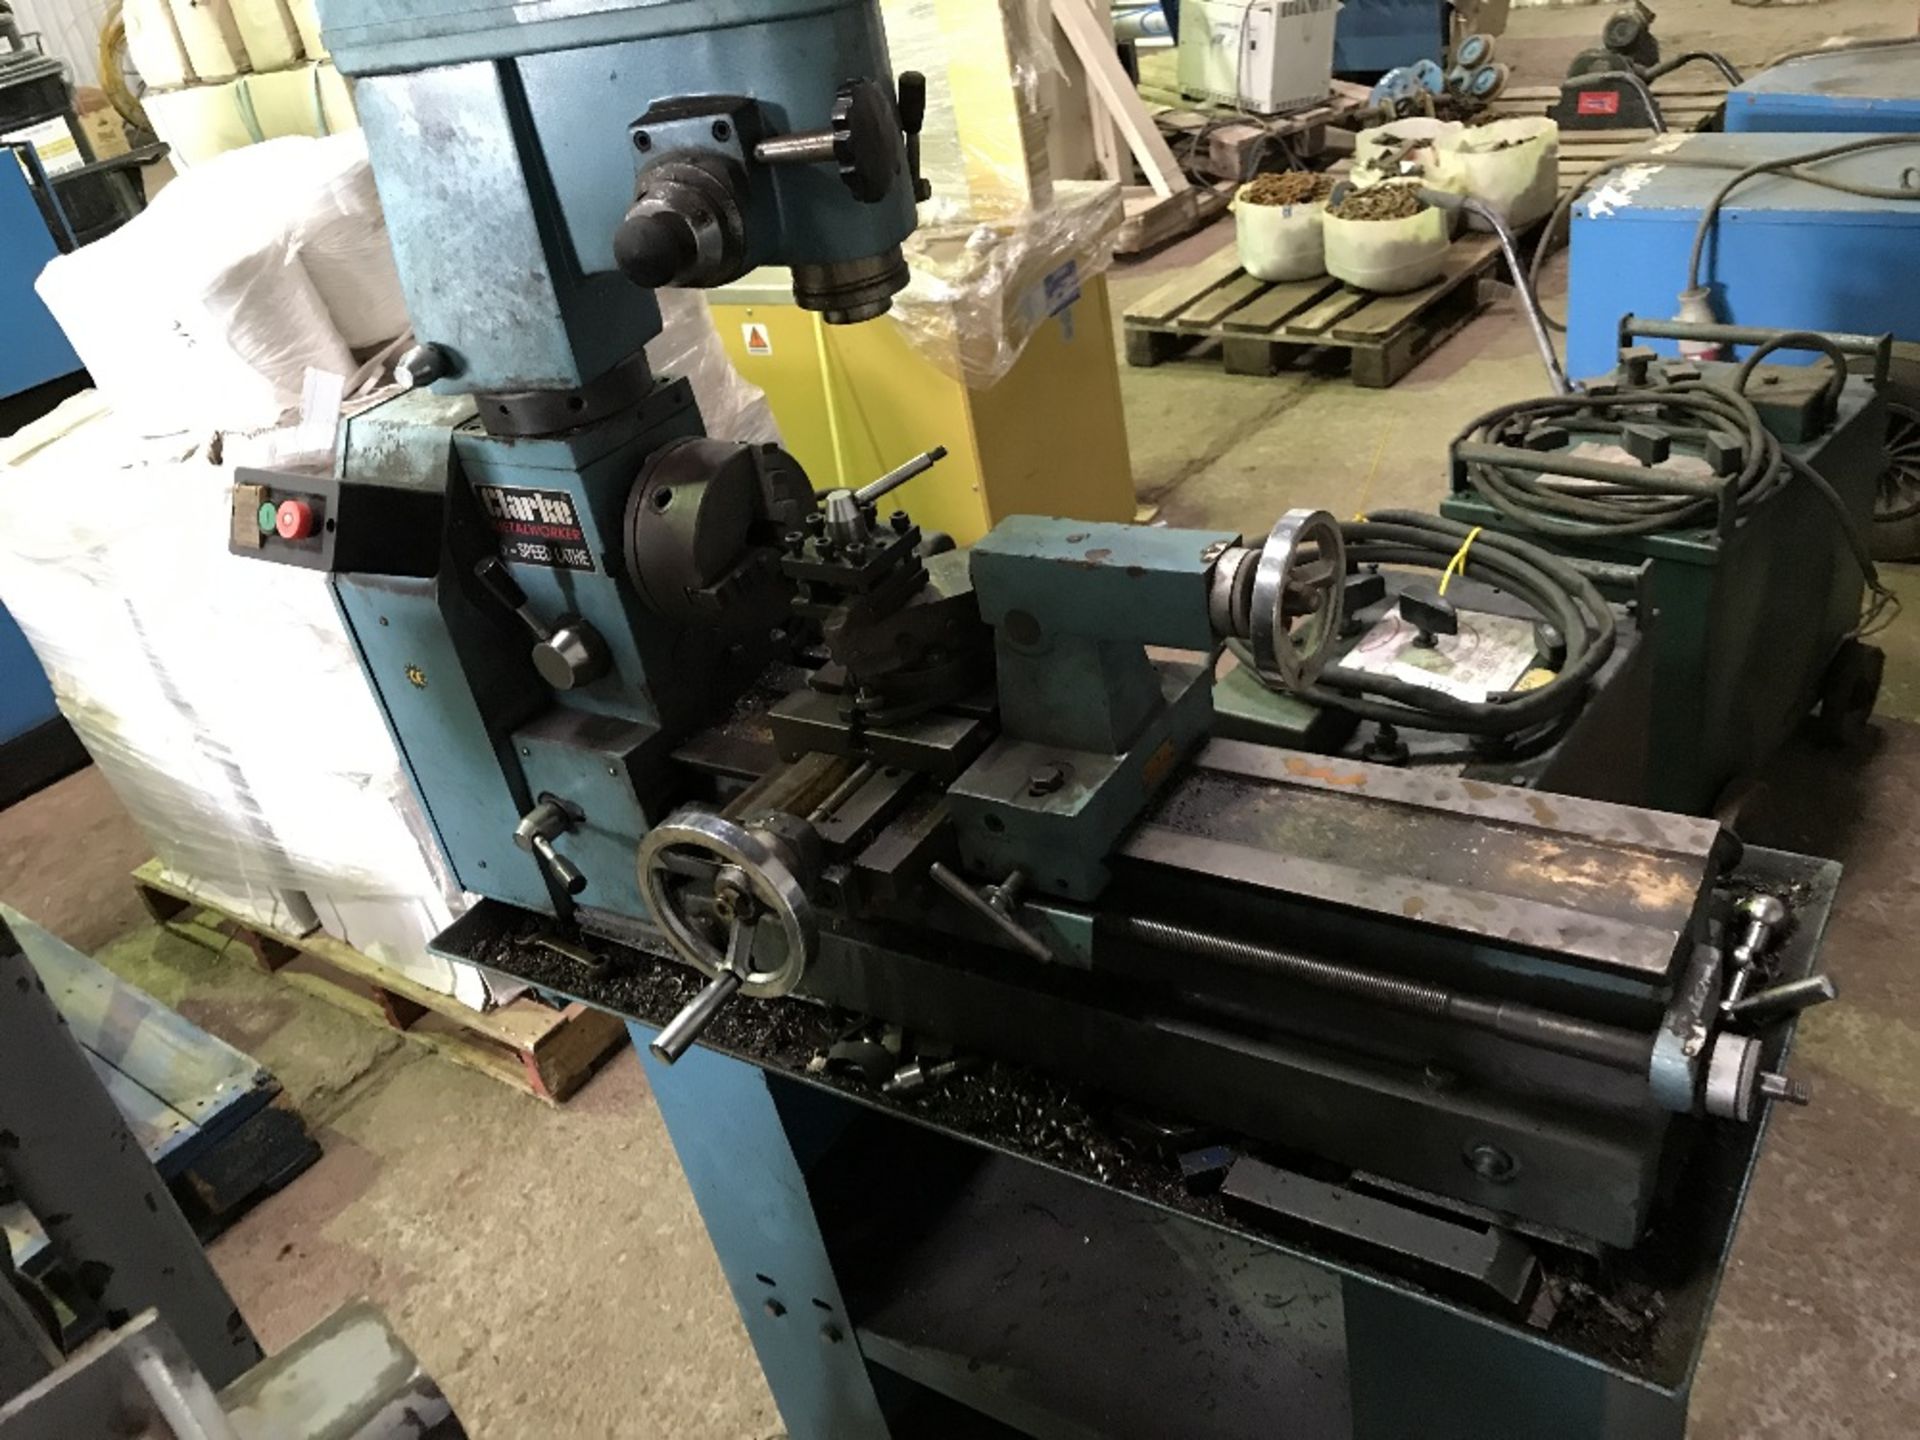 CLARKE METAL WORKER 12 SPEED MILL/DRILL/LATHE, DIRECT FROM COMPANY LIQUIDATION